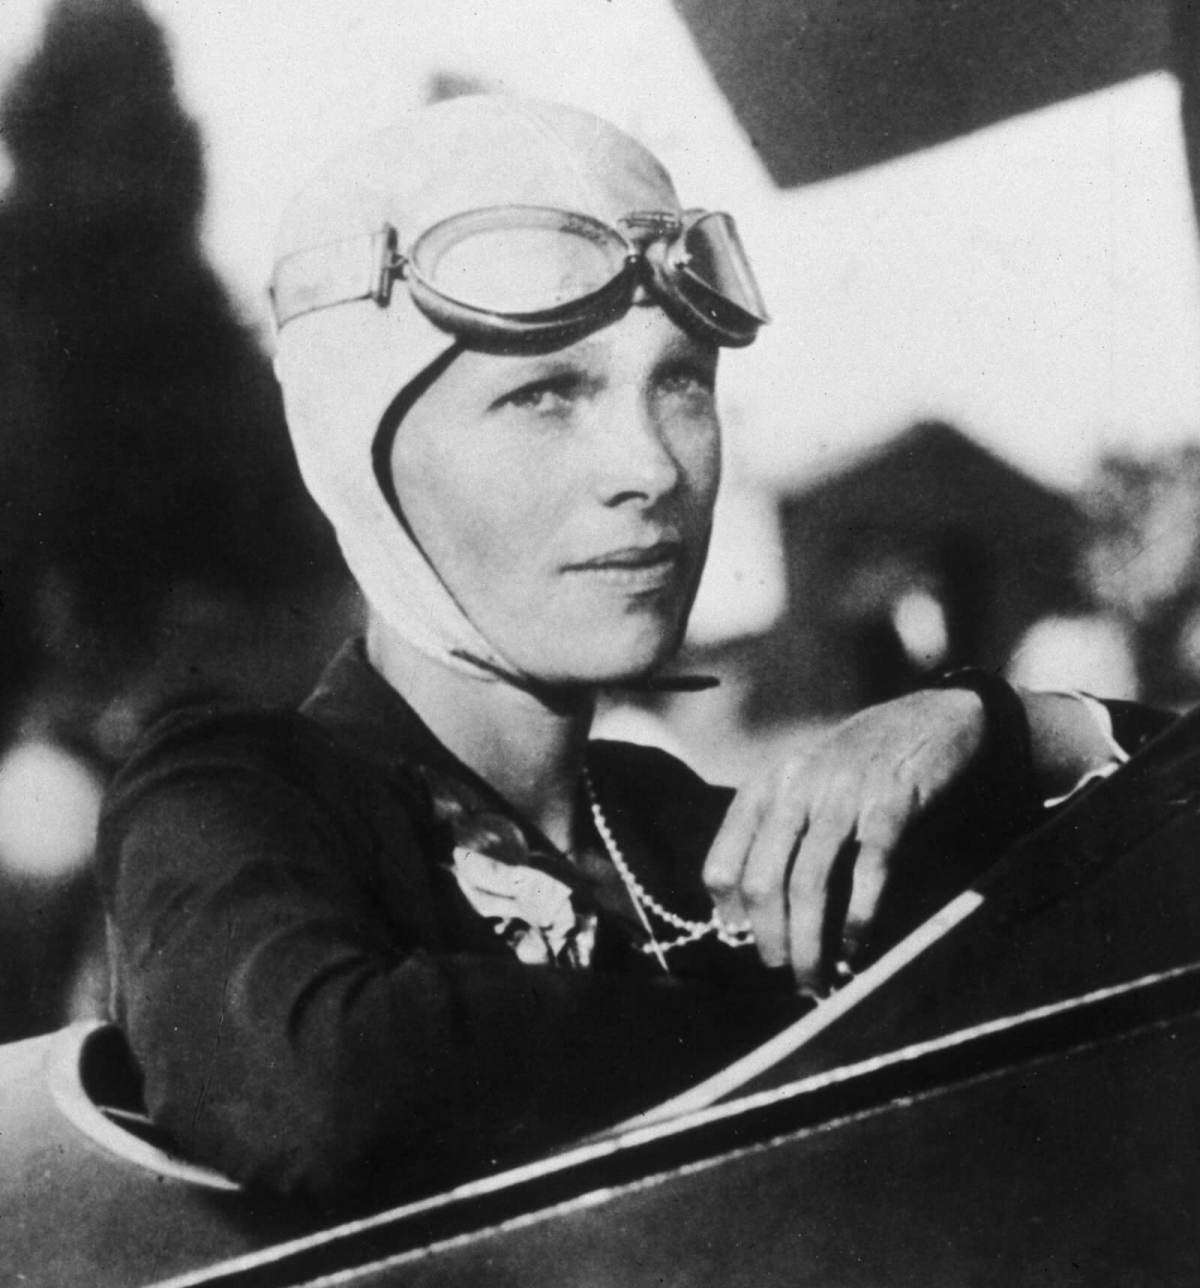 Cord Car Belonging to Amelia Earhart Found, Resurrected, and Roadworthy After It Was Missing for Years